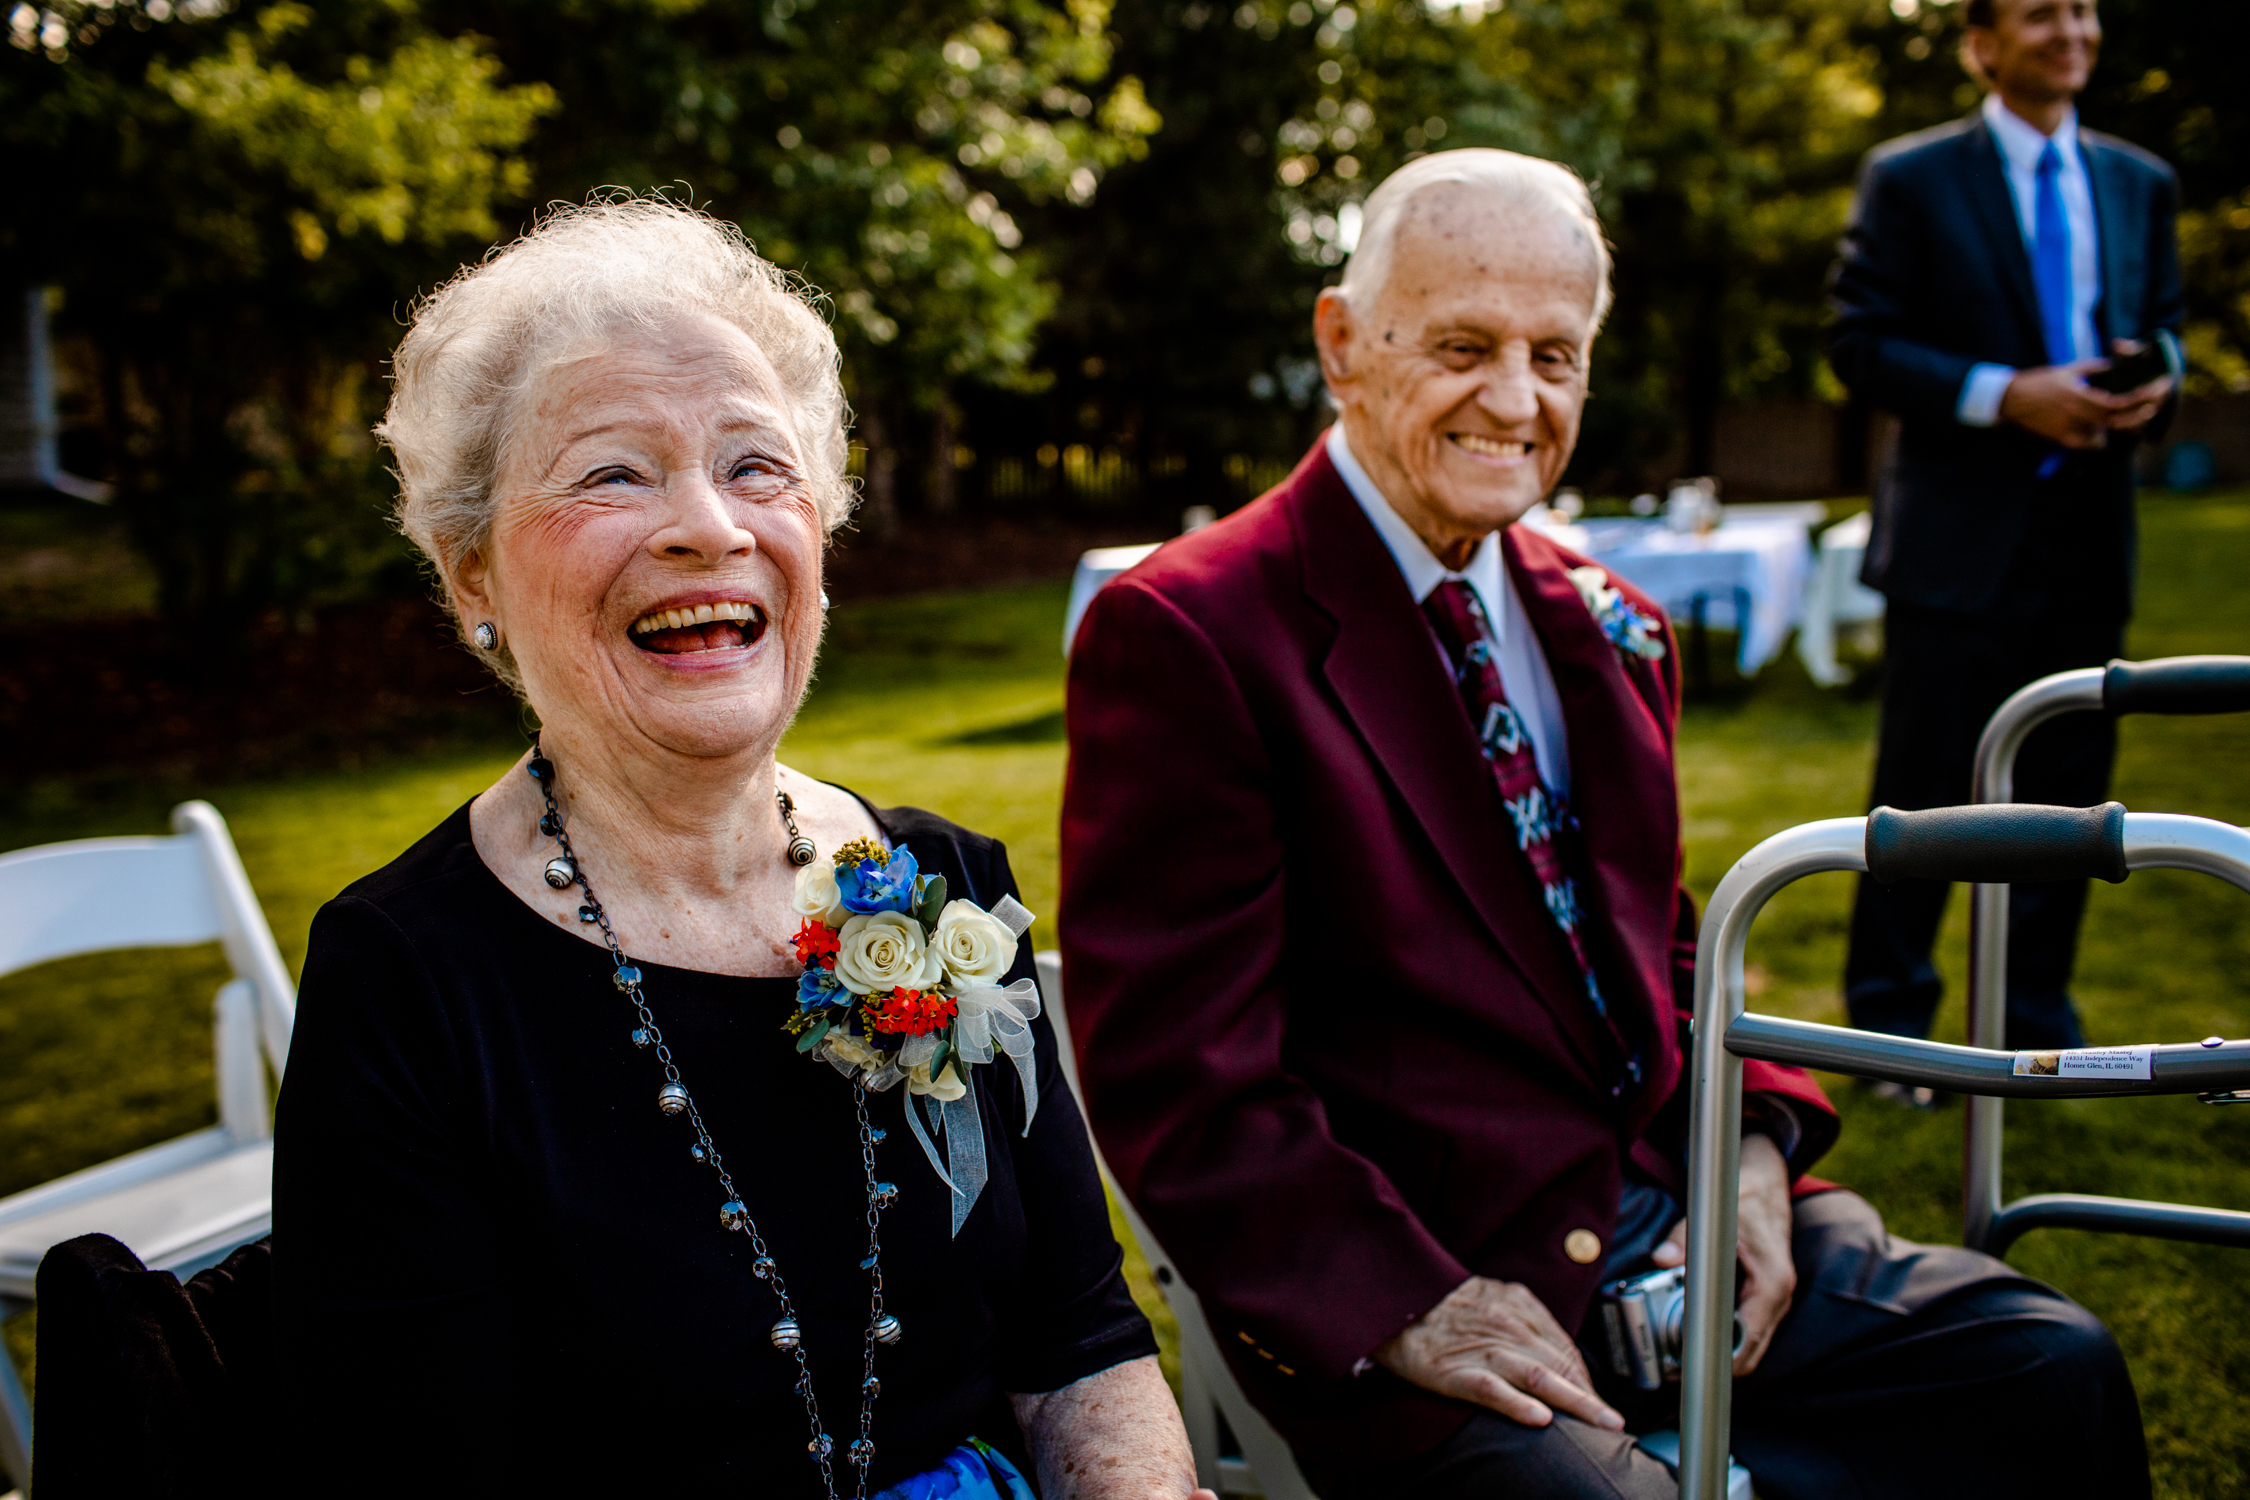 Grandparents laugh together during a Naperville micro wedding.